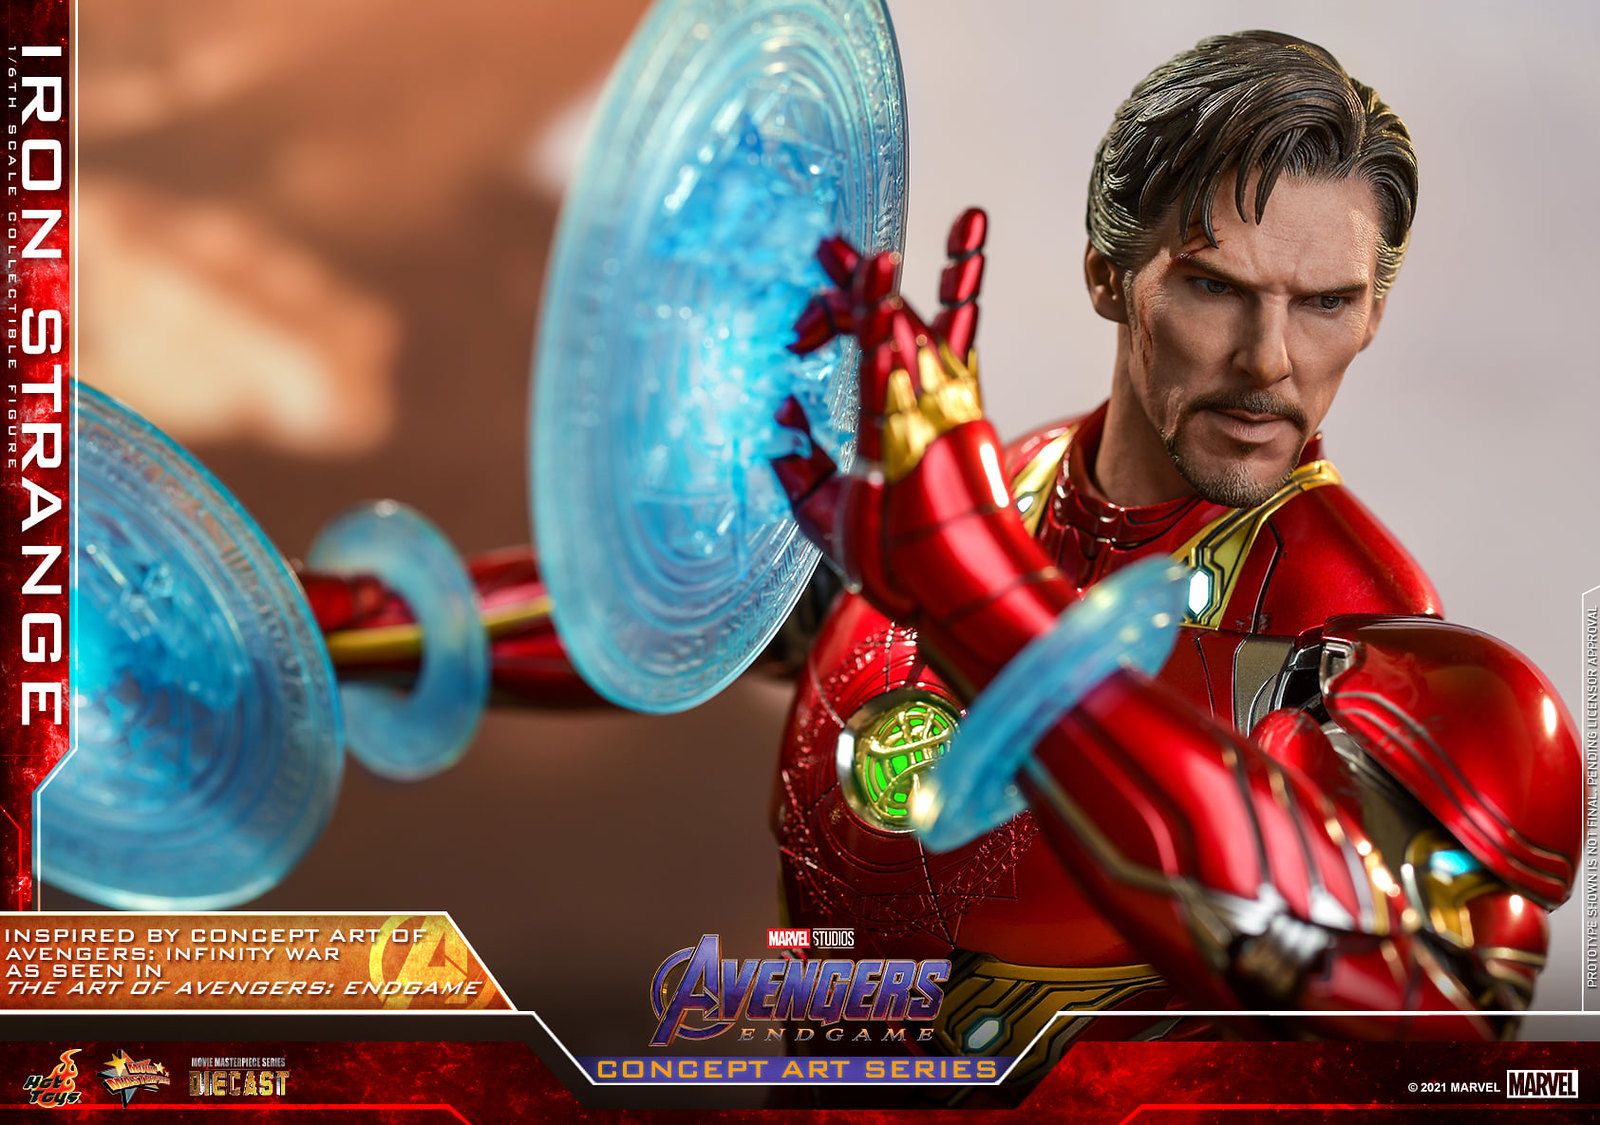 NEW PRODUCT: Hot Toys Avengers: Endgame (Concept Art Series) - 1/6th scale Iron Strange Collectible Figure 51312230255_52f0963f7e_h